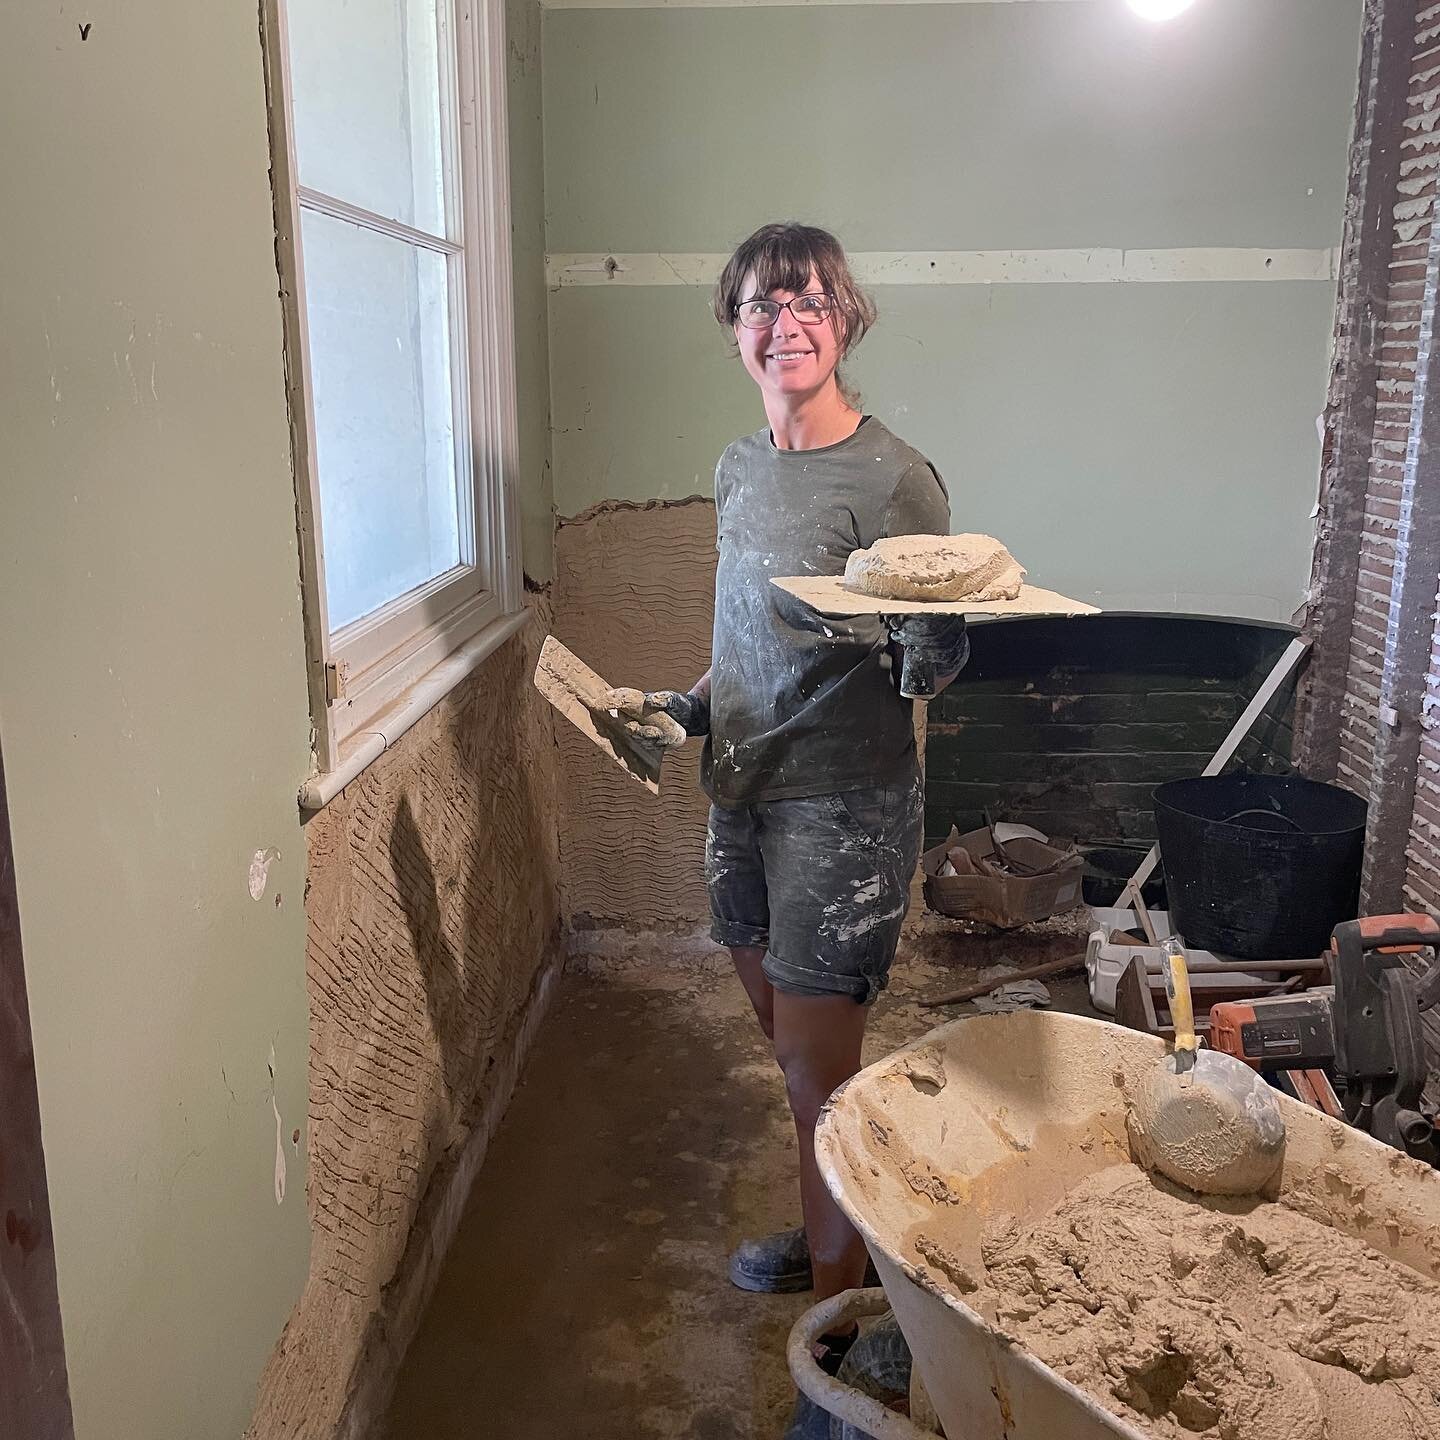 Back at Mylor and Girl Friday came early! Excited to use her new hawk again. The trowel action getting better to. Maybe #girlfriday will become girl everyday of the week at some point! #lovemyjob #limerender